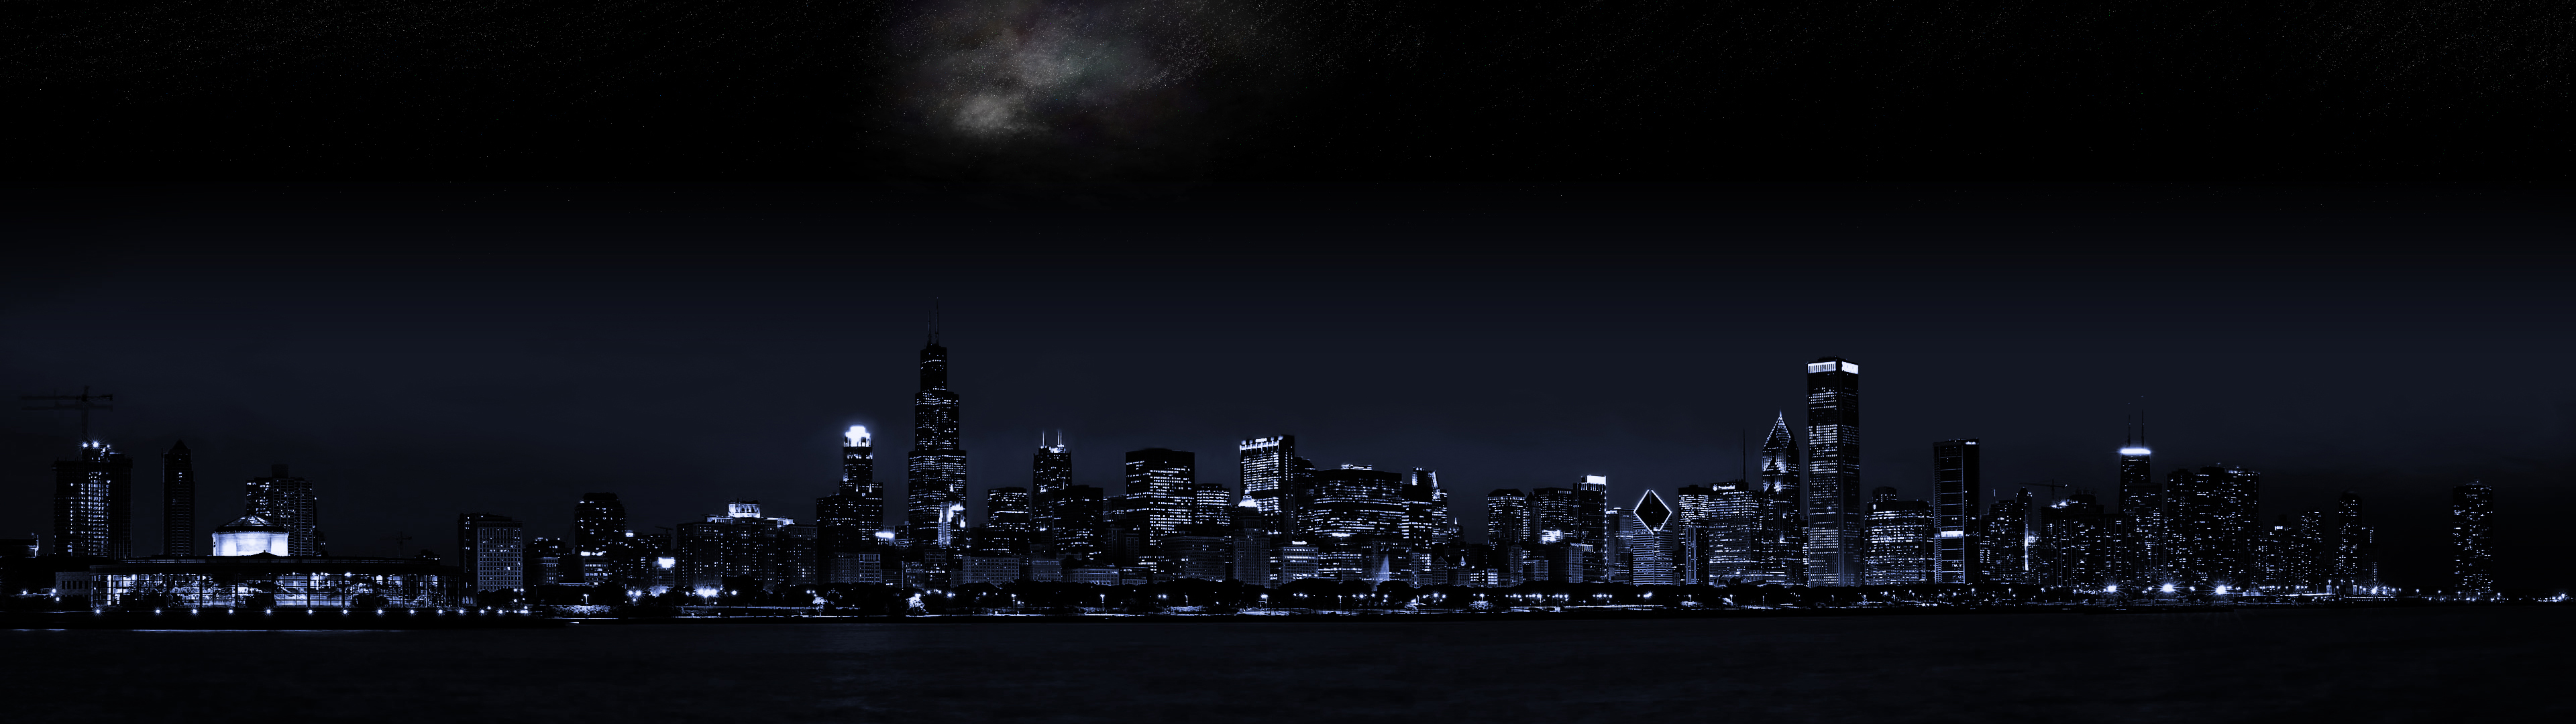 Cityscapes Night Buildings Wallpaper Background